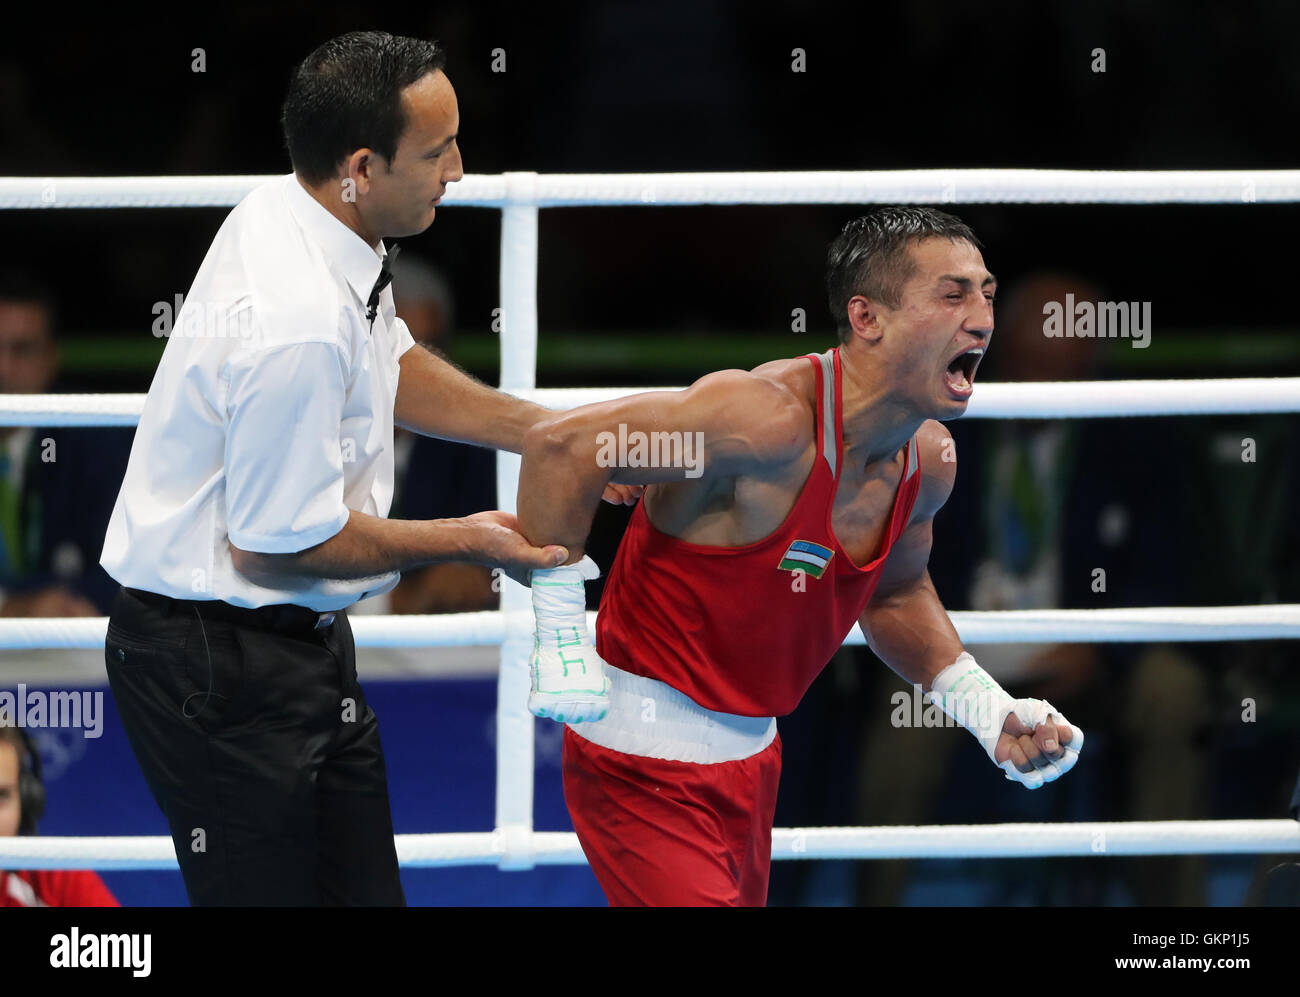 Uzbekistan's Bektemir Melikuziev celebrates victory in the Men's middle 75 kg on the sixteenth day of the Rio Olympics Games, Brazil. PRESS ASSOCIATION Photo. Picture date: Sunday August 21, 2016. Photo credit should read: Owen Humphreys/PA Wire. Stock Photo